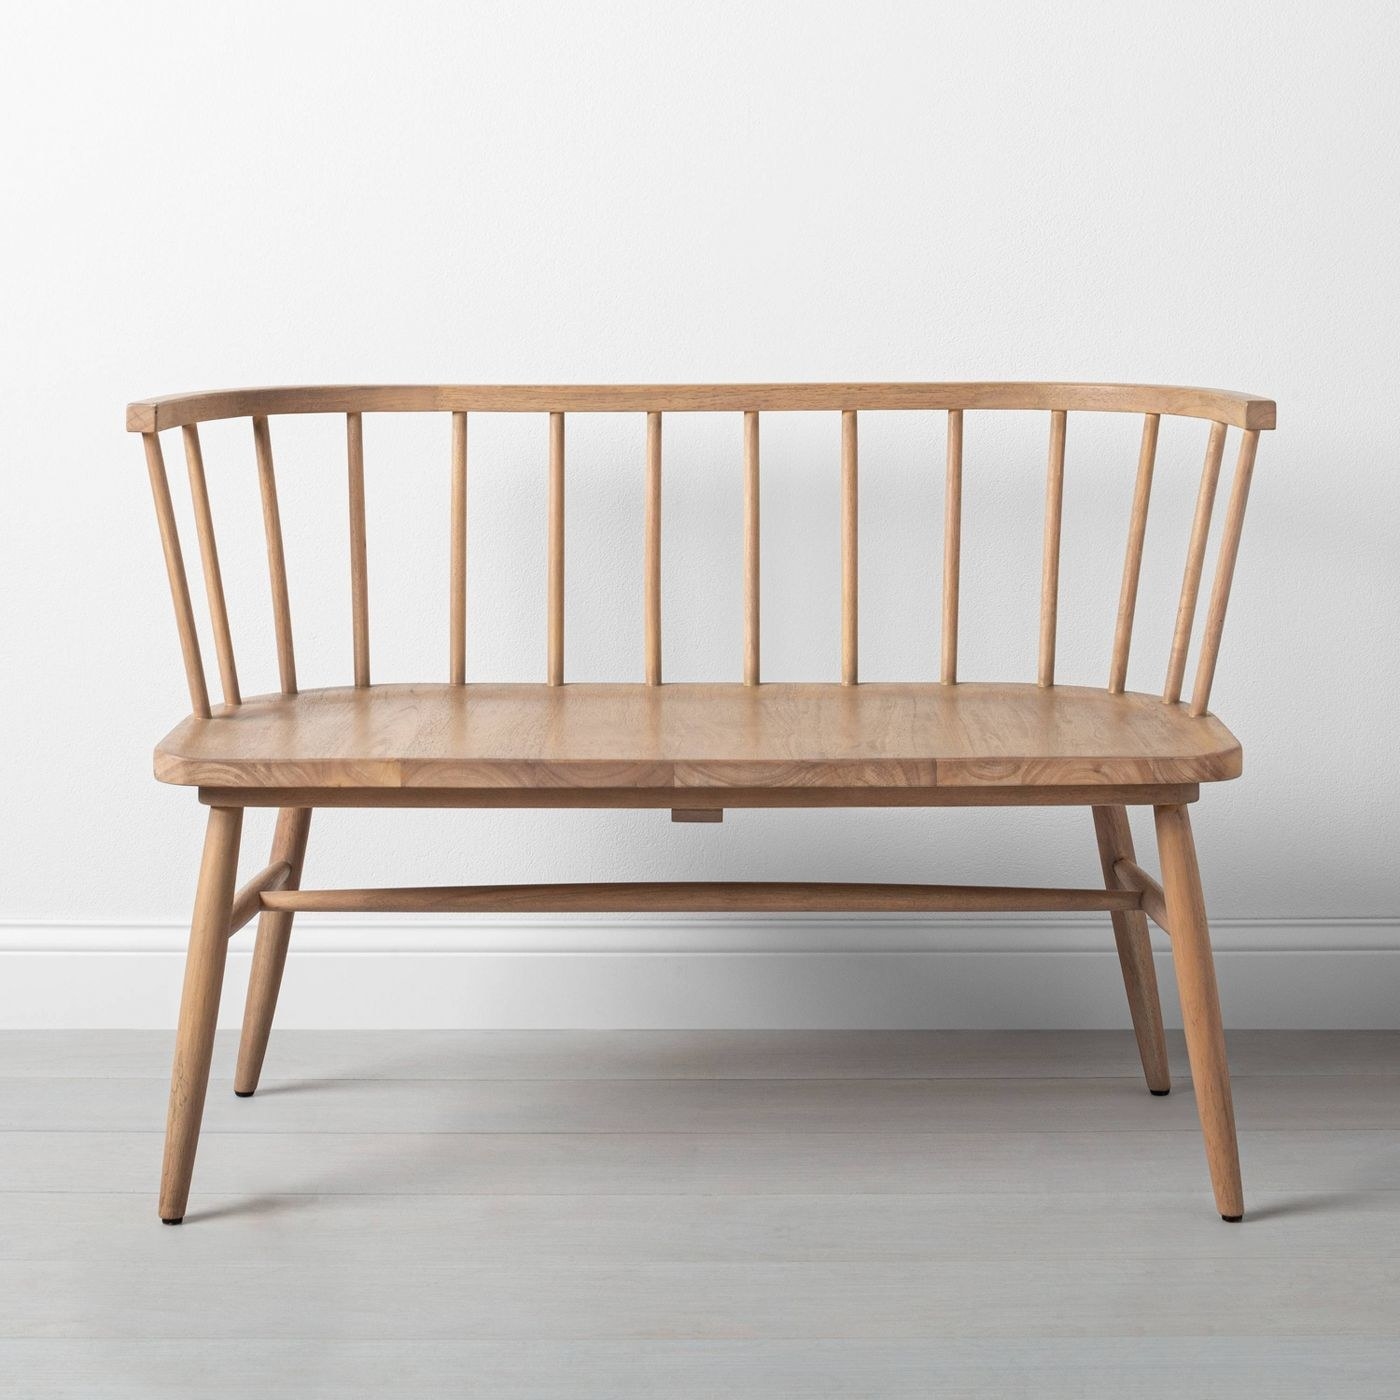 White oak bench with vertical bars along the backside